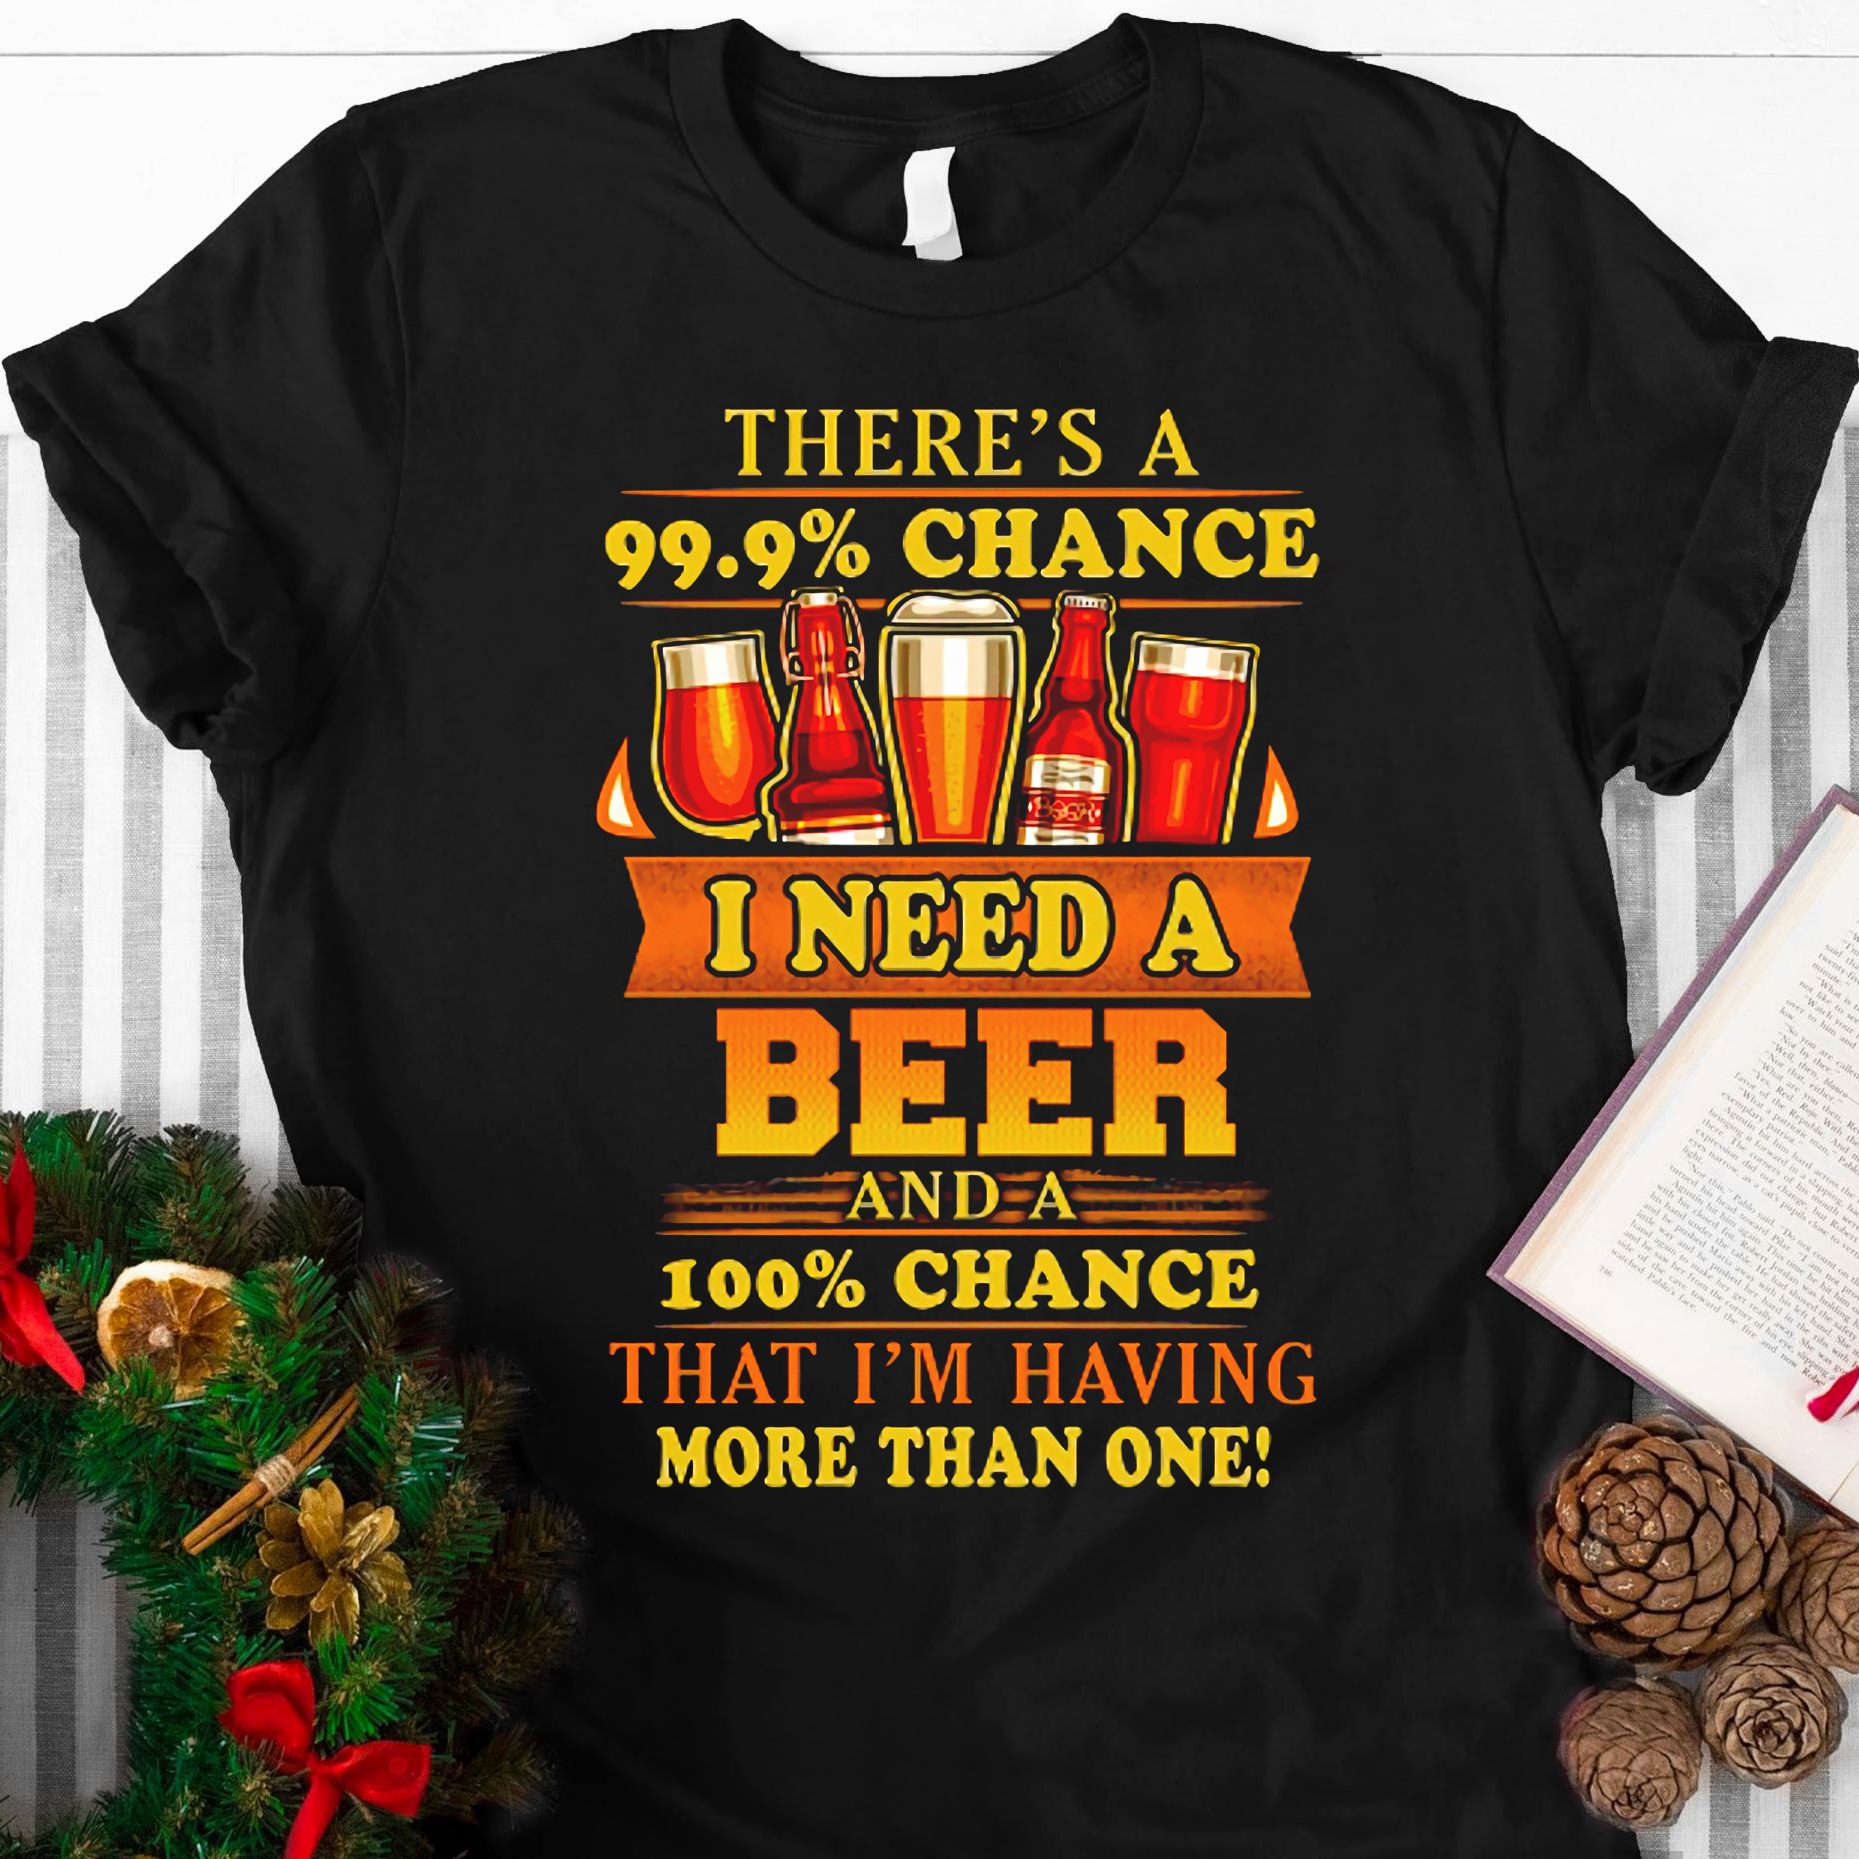 There's a 99,9% chance I need a beer and a 100% chance that I'm having more than one - Beer lover